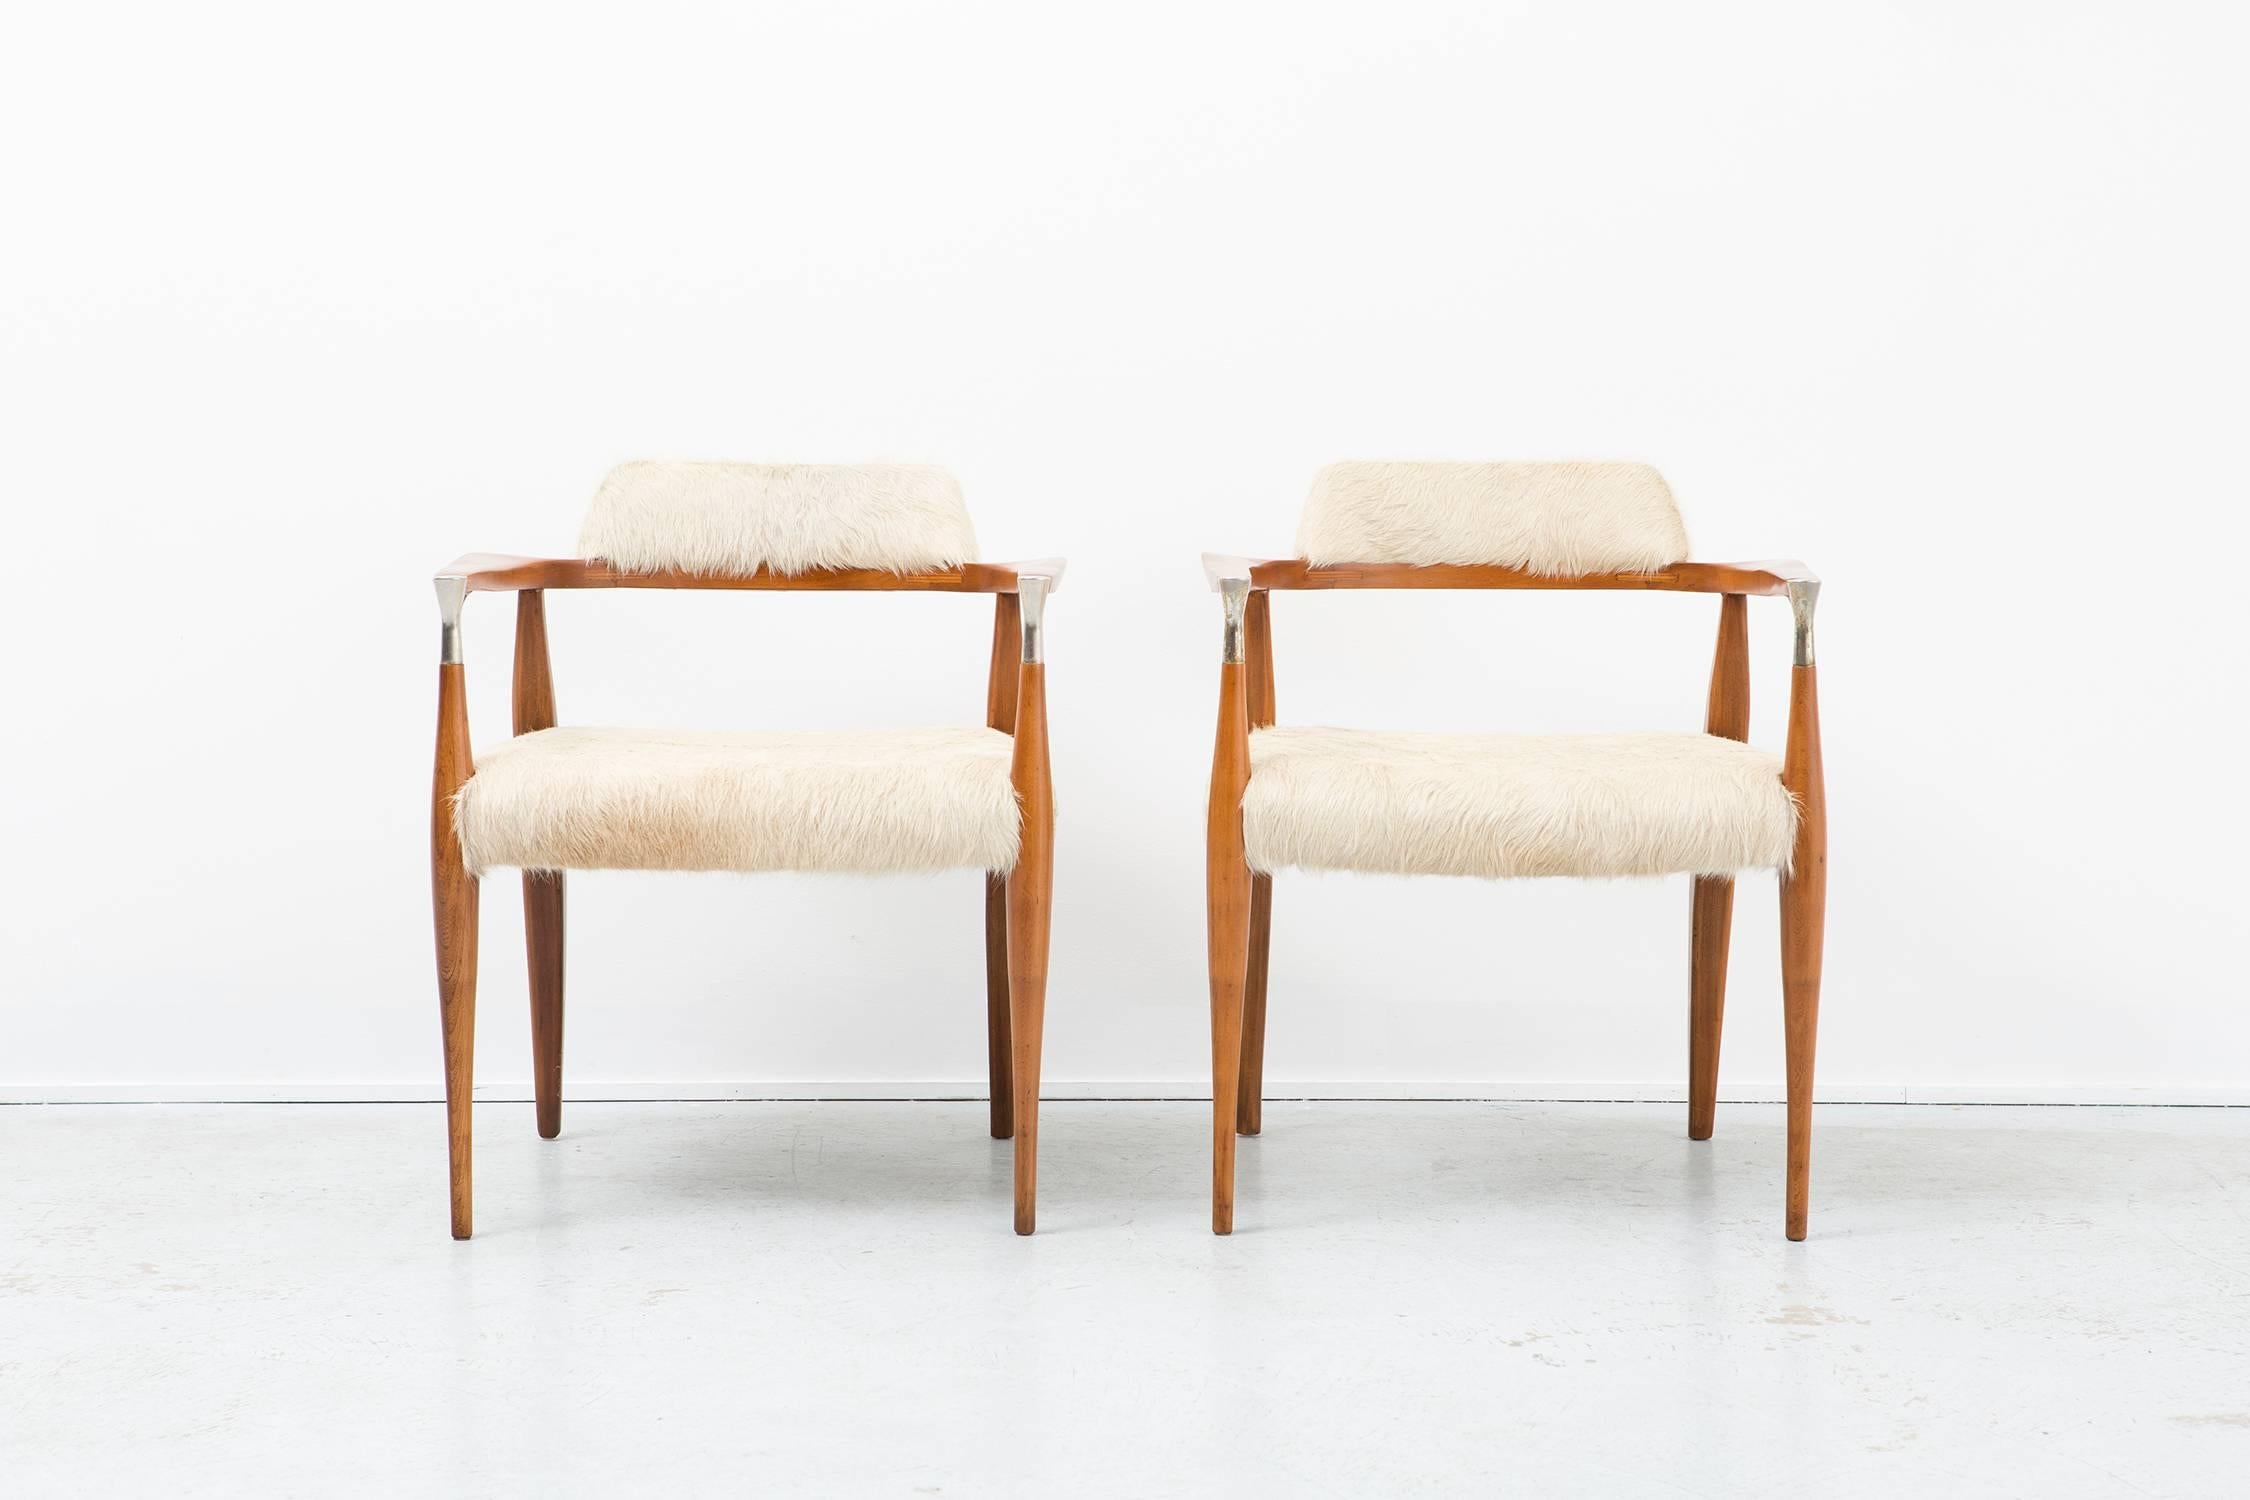 Set of two accent chairs

designer unknown believed to be American made 

circa 1950s

reupholstered in Brazilian cowhide

Measure: 29